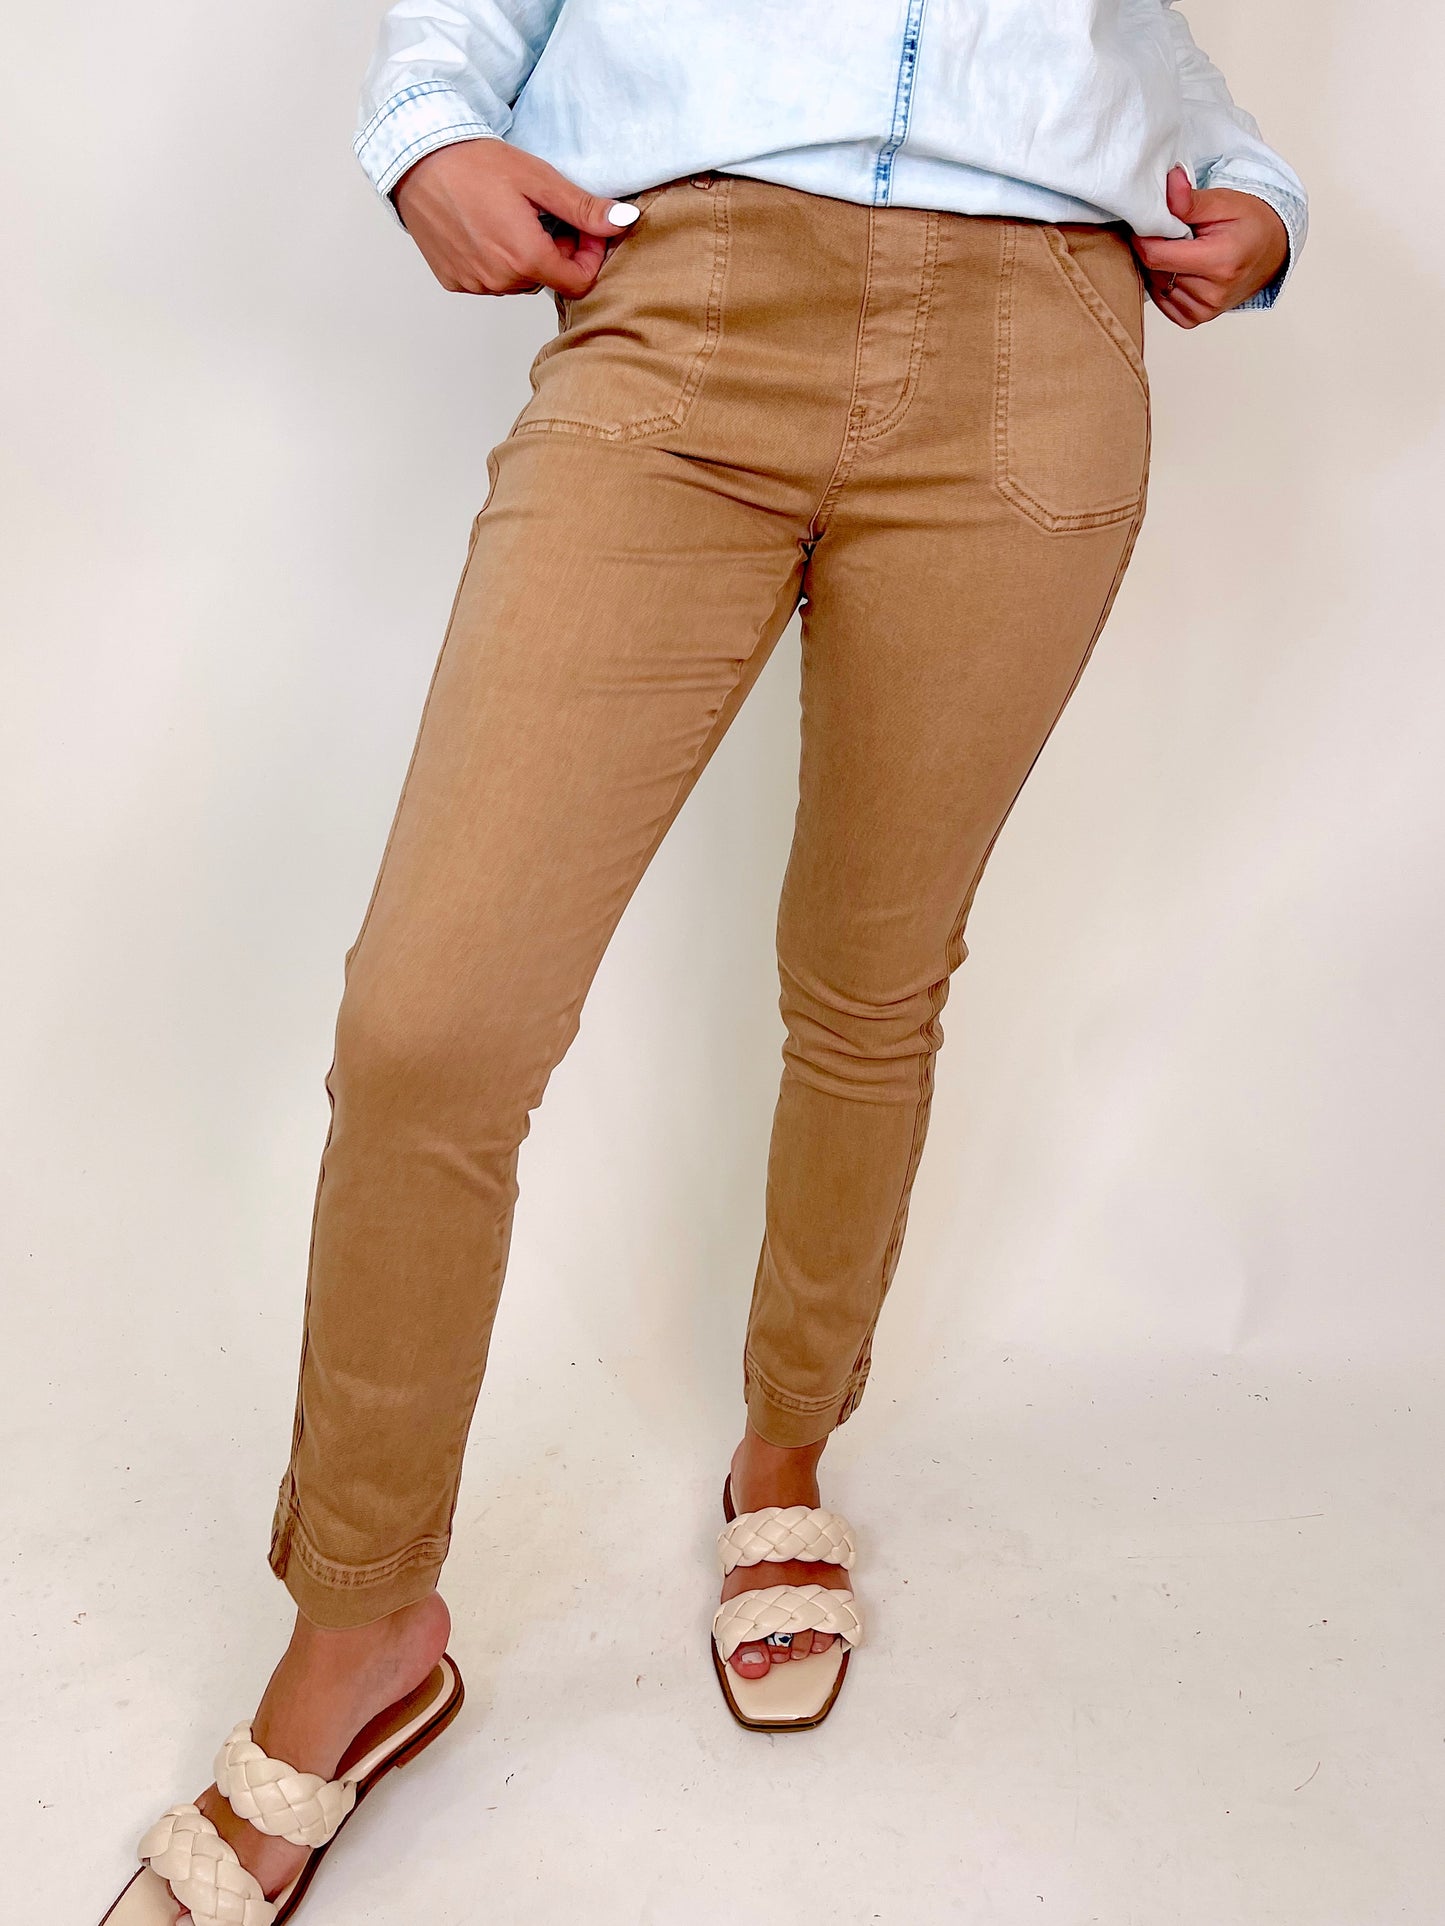 Pull-On 5 Pocket Pant | Tribal-Jeans-Tribal-The Village Shoppe, Women’s Fashion Boutique, Shop Online and In Store - Located in Muscle Shoals, AL.